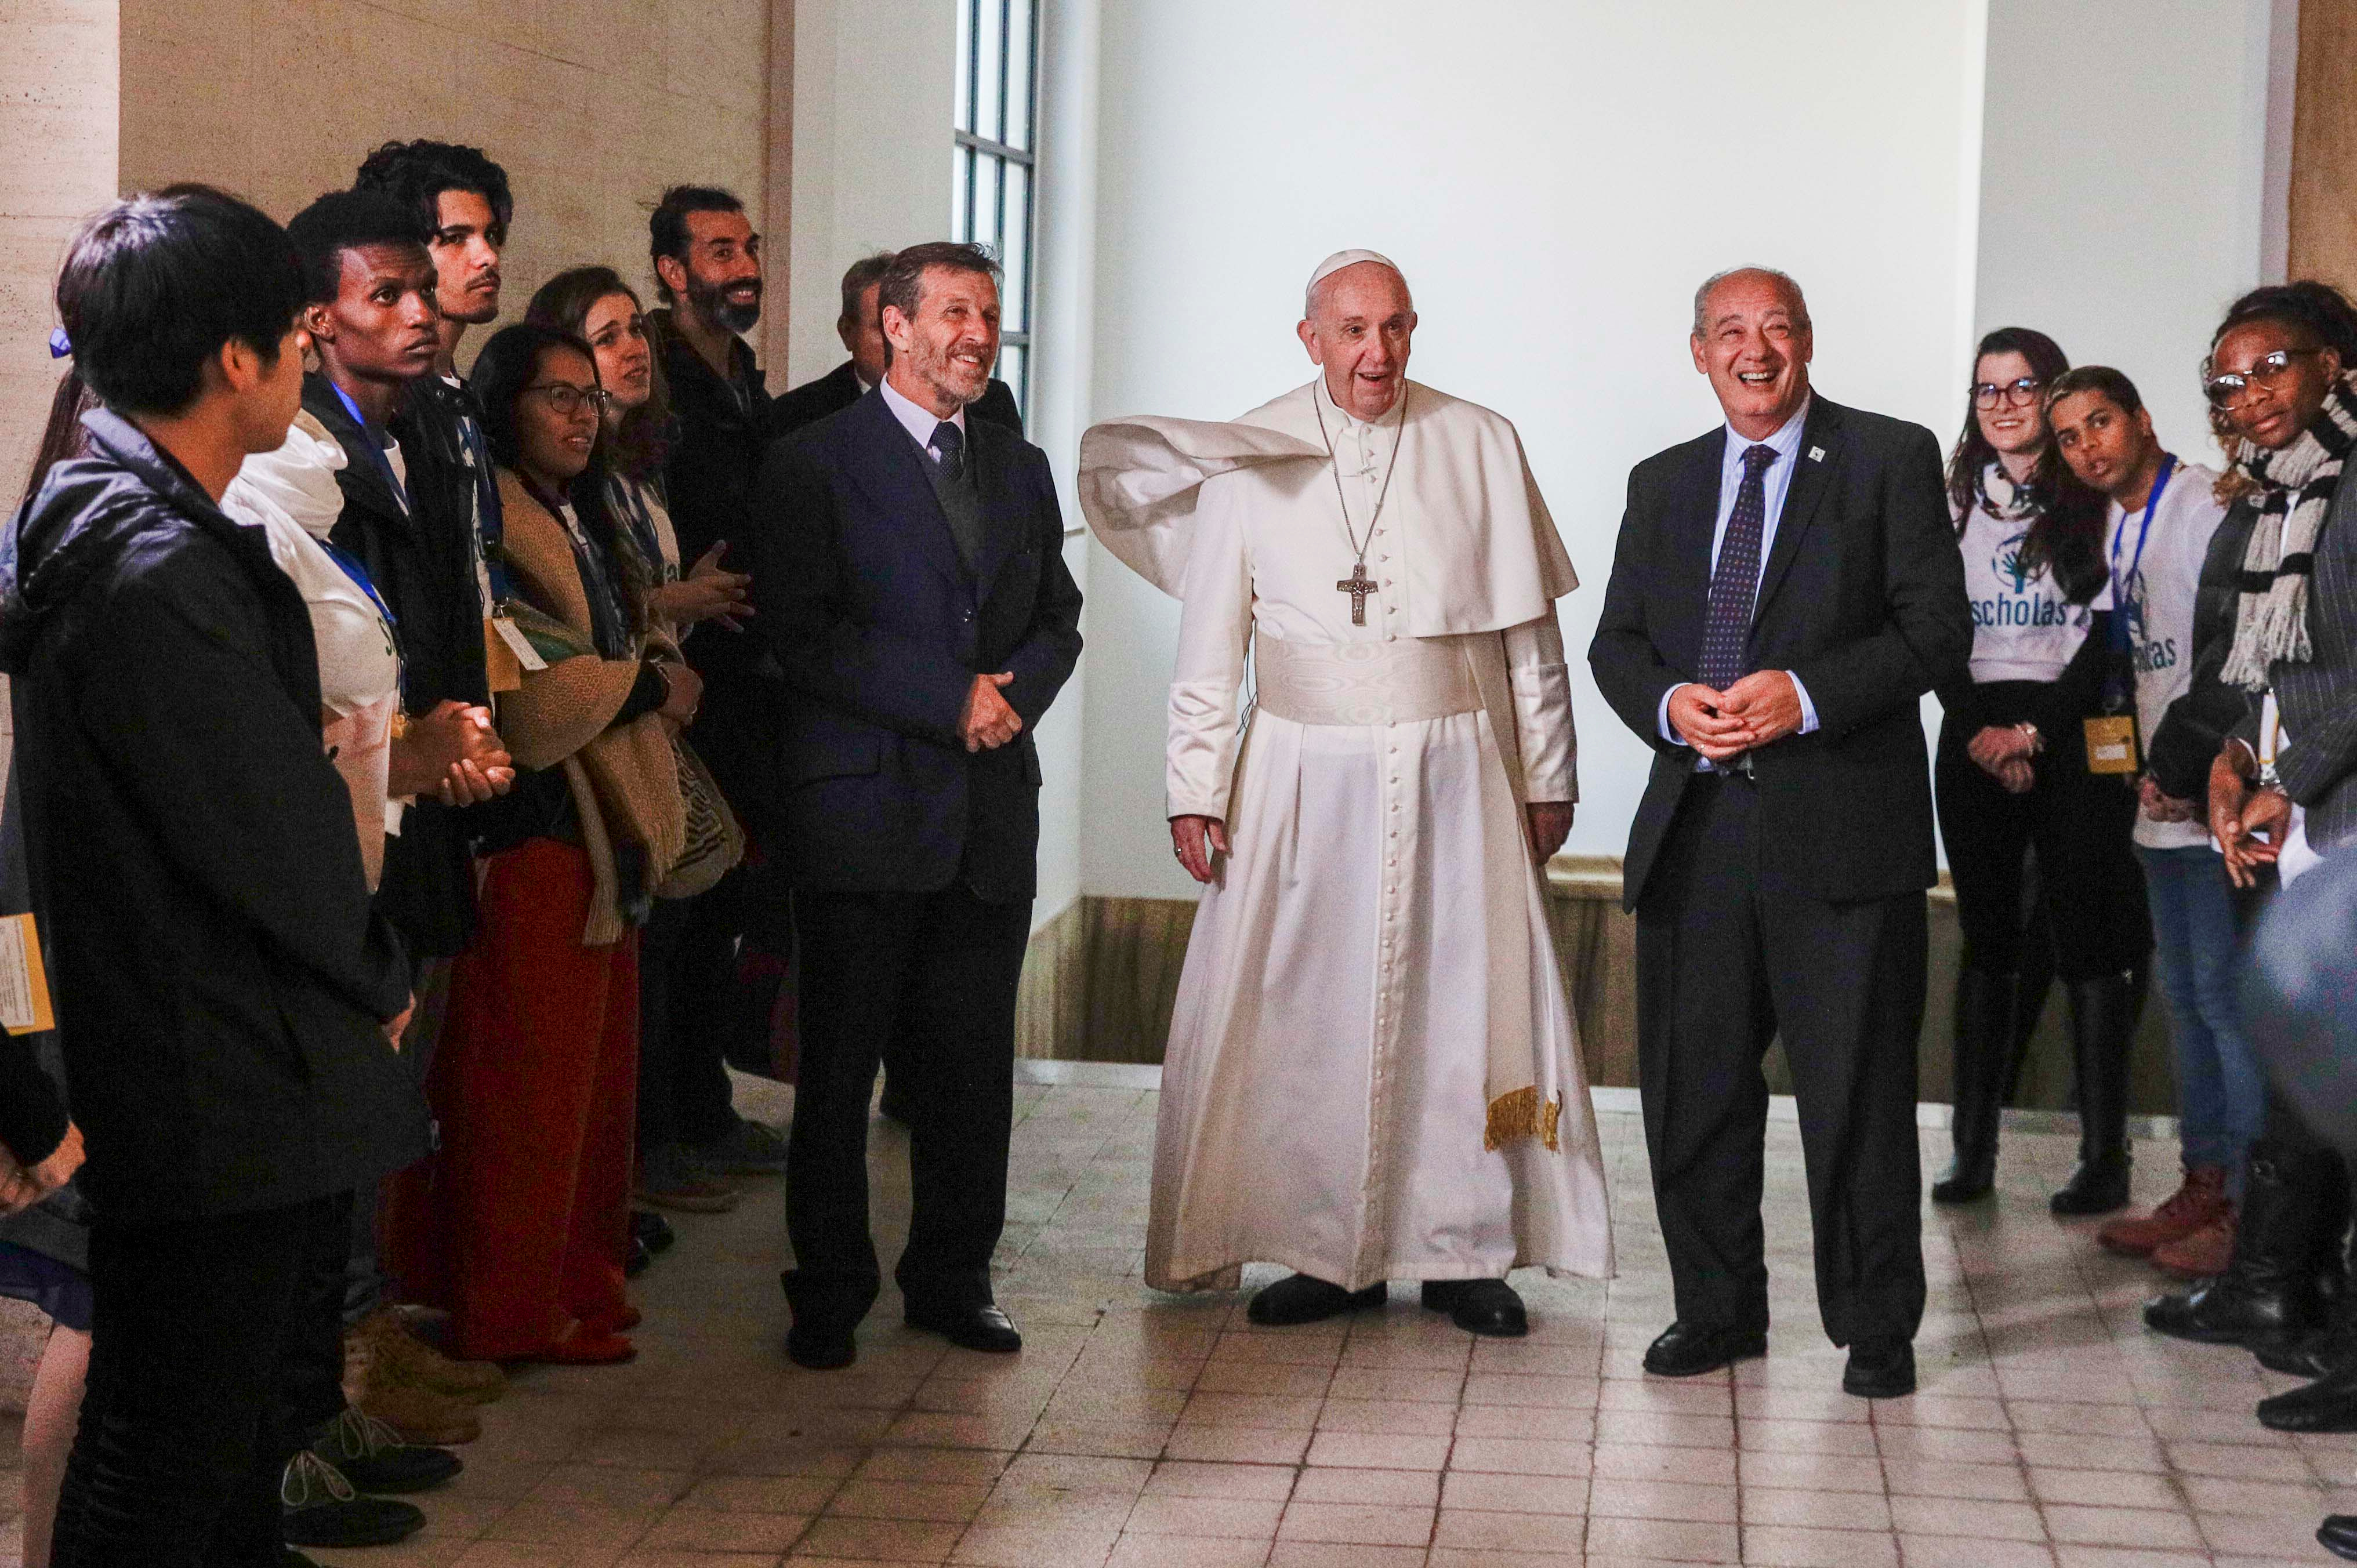 Pope Francis arrives to the inauguration of the new headquarters of Pontifical Scholas Occurrentes in Rome